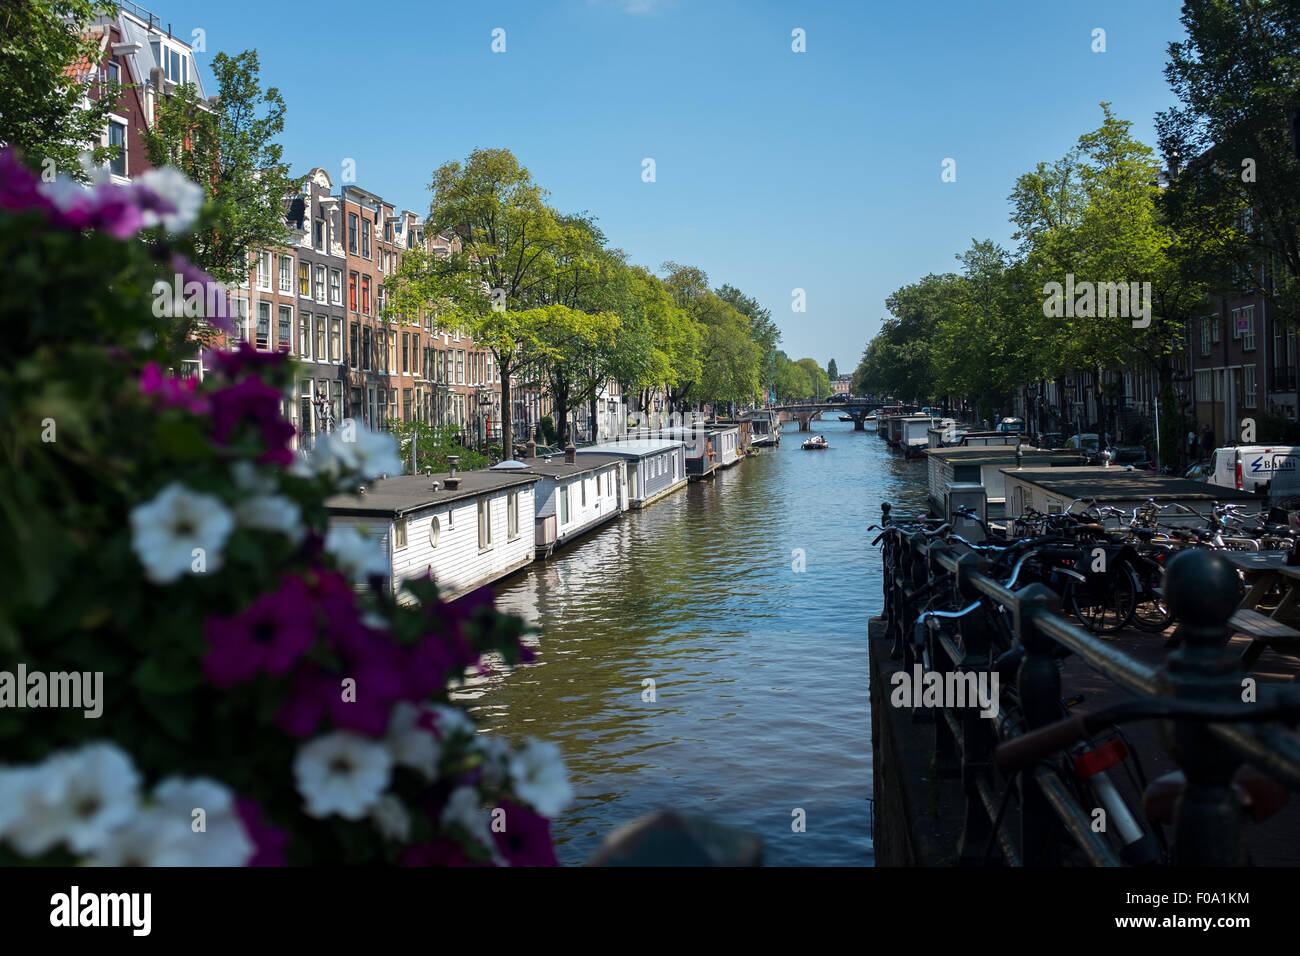 Scenic canal views of Amsterdam city centre Stock Photo